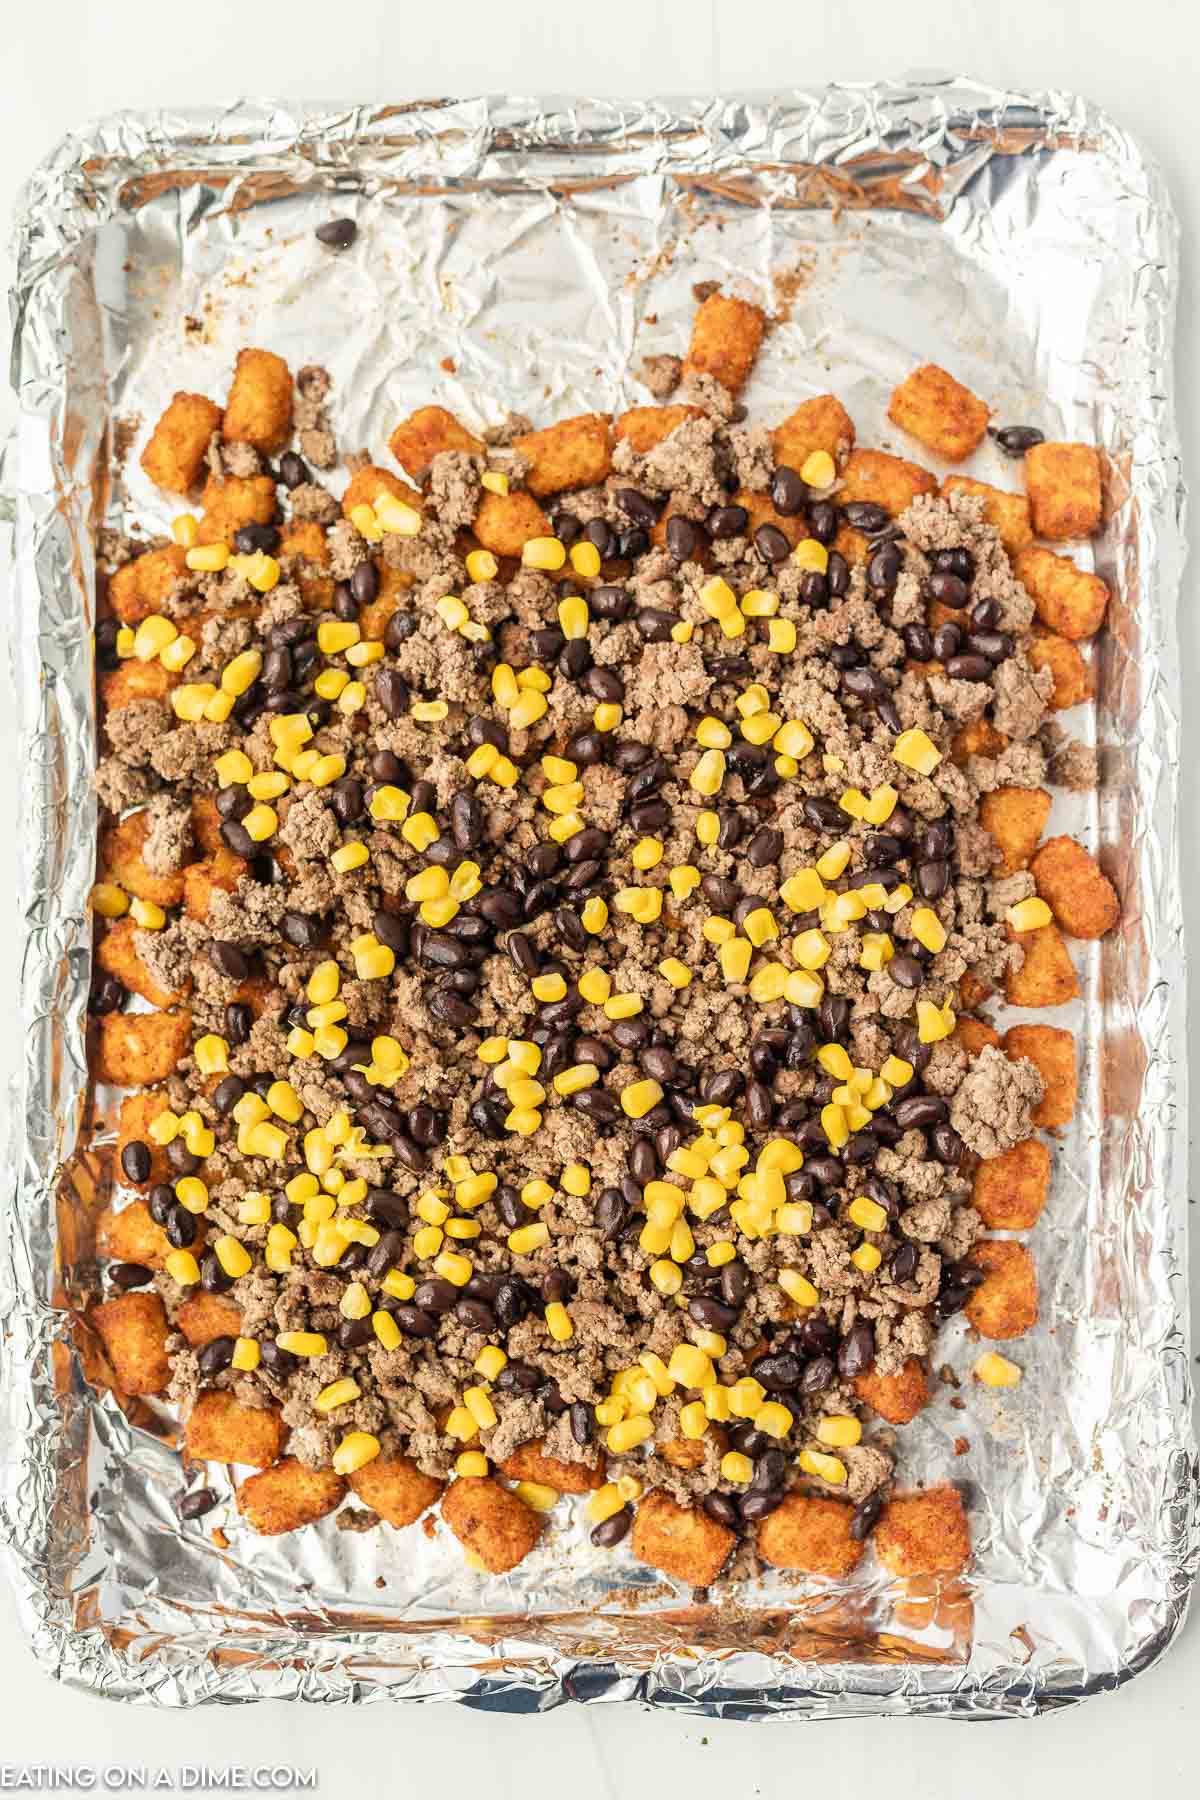 Top with tator tots with ground beef, black beans and corn